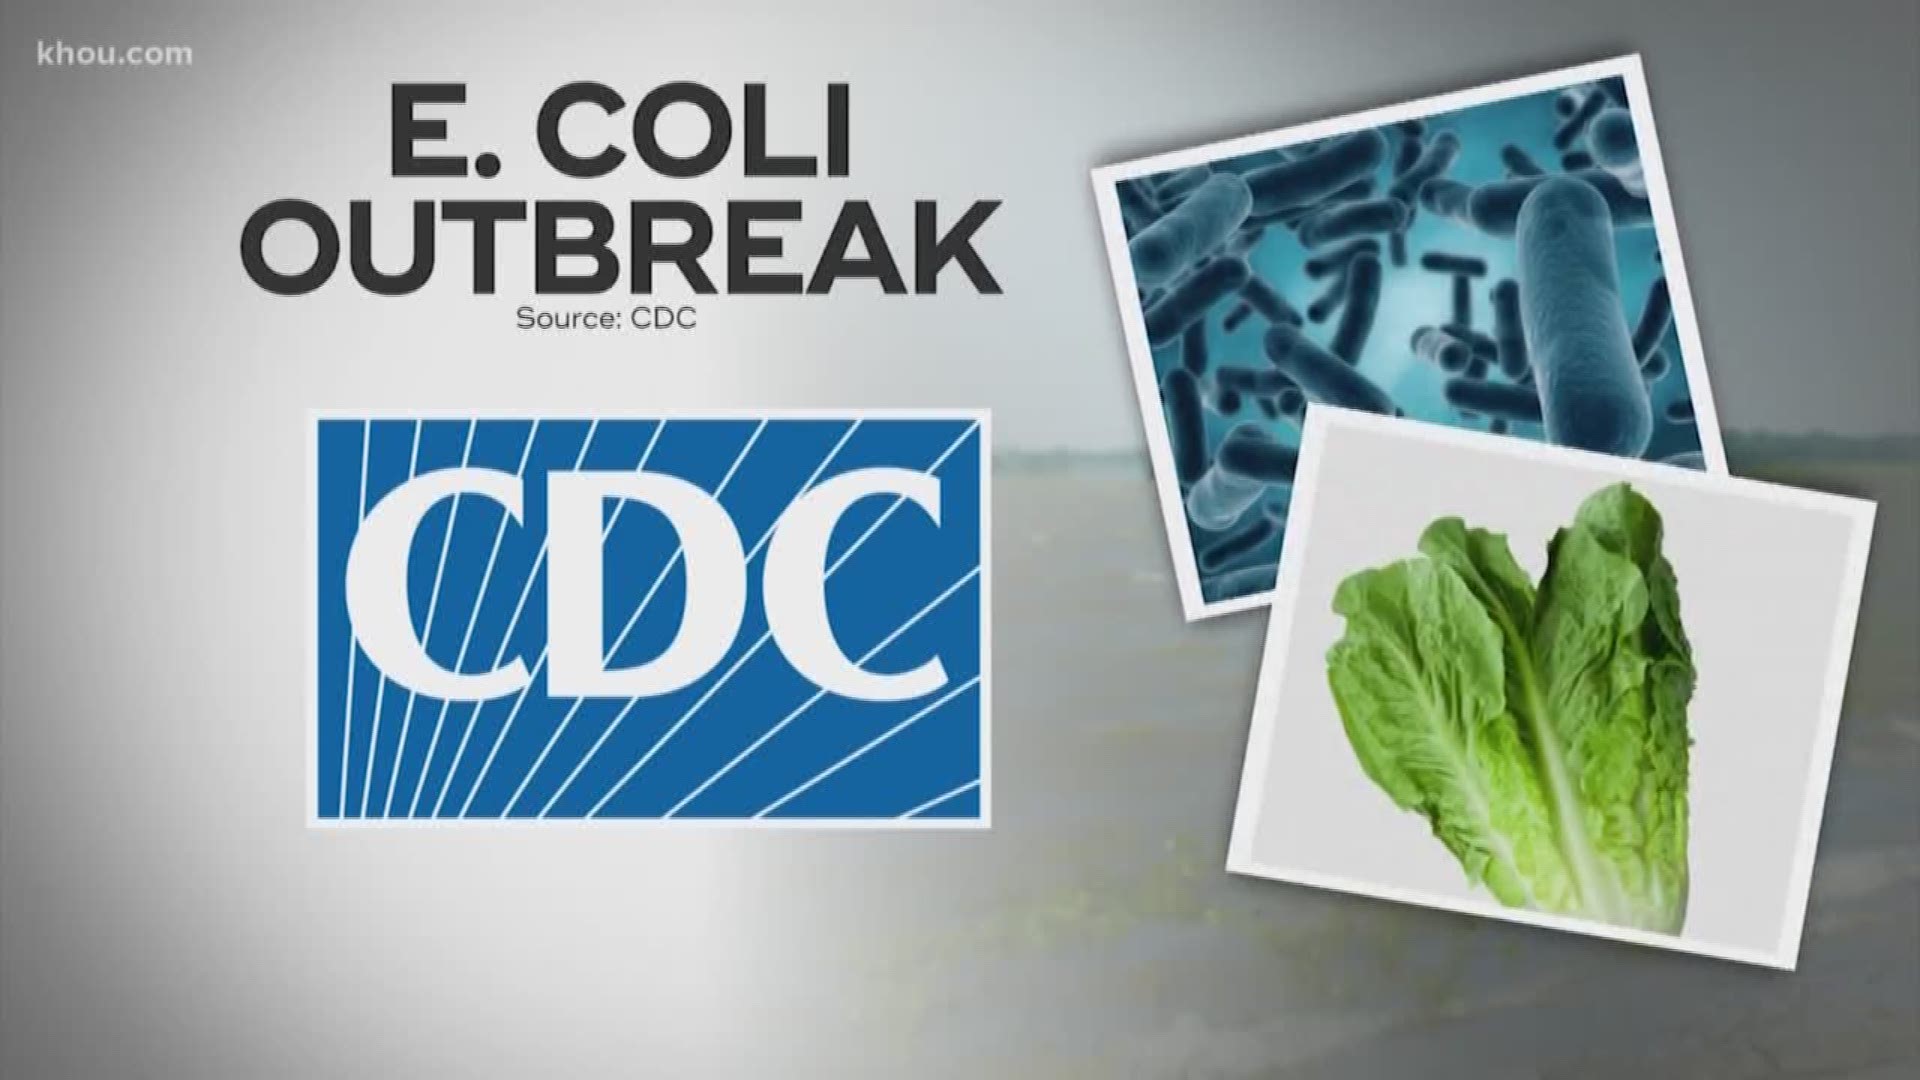 H-E-B, Kroger and Whataburger have voluntarily removed all romaine lettuce products after U.S. officials alerted to an E. coli outbreak.